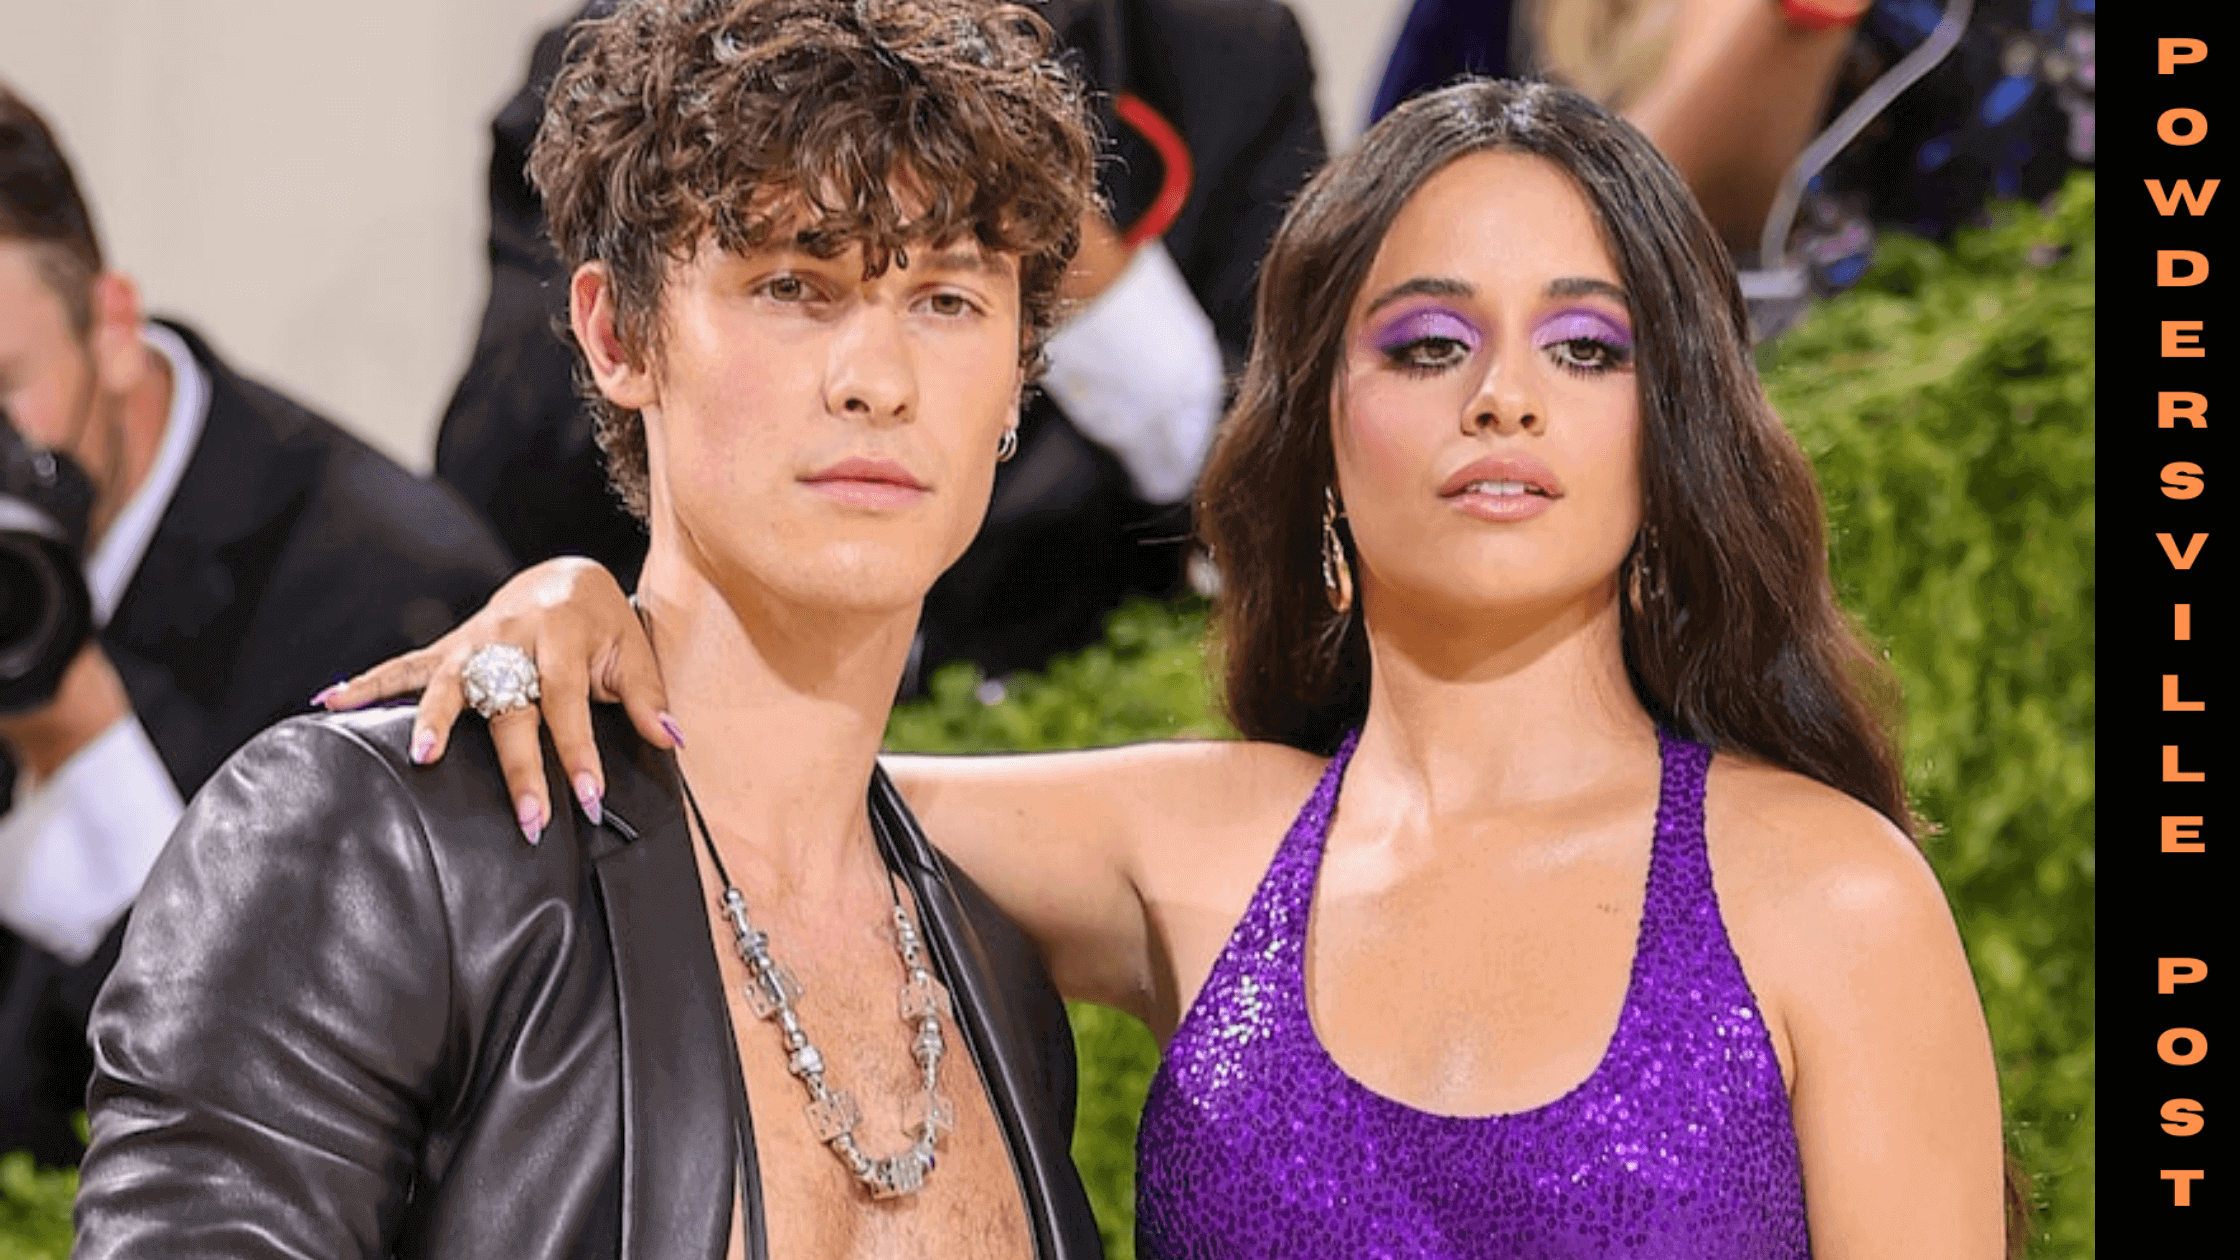 Shawn Mendes Shares His Thoughts After Camila Cabello Split